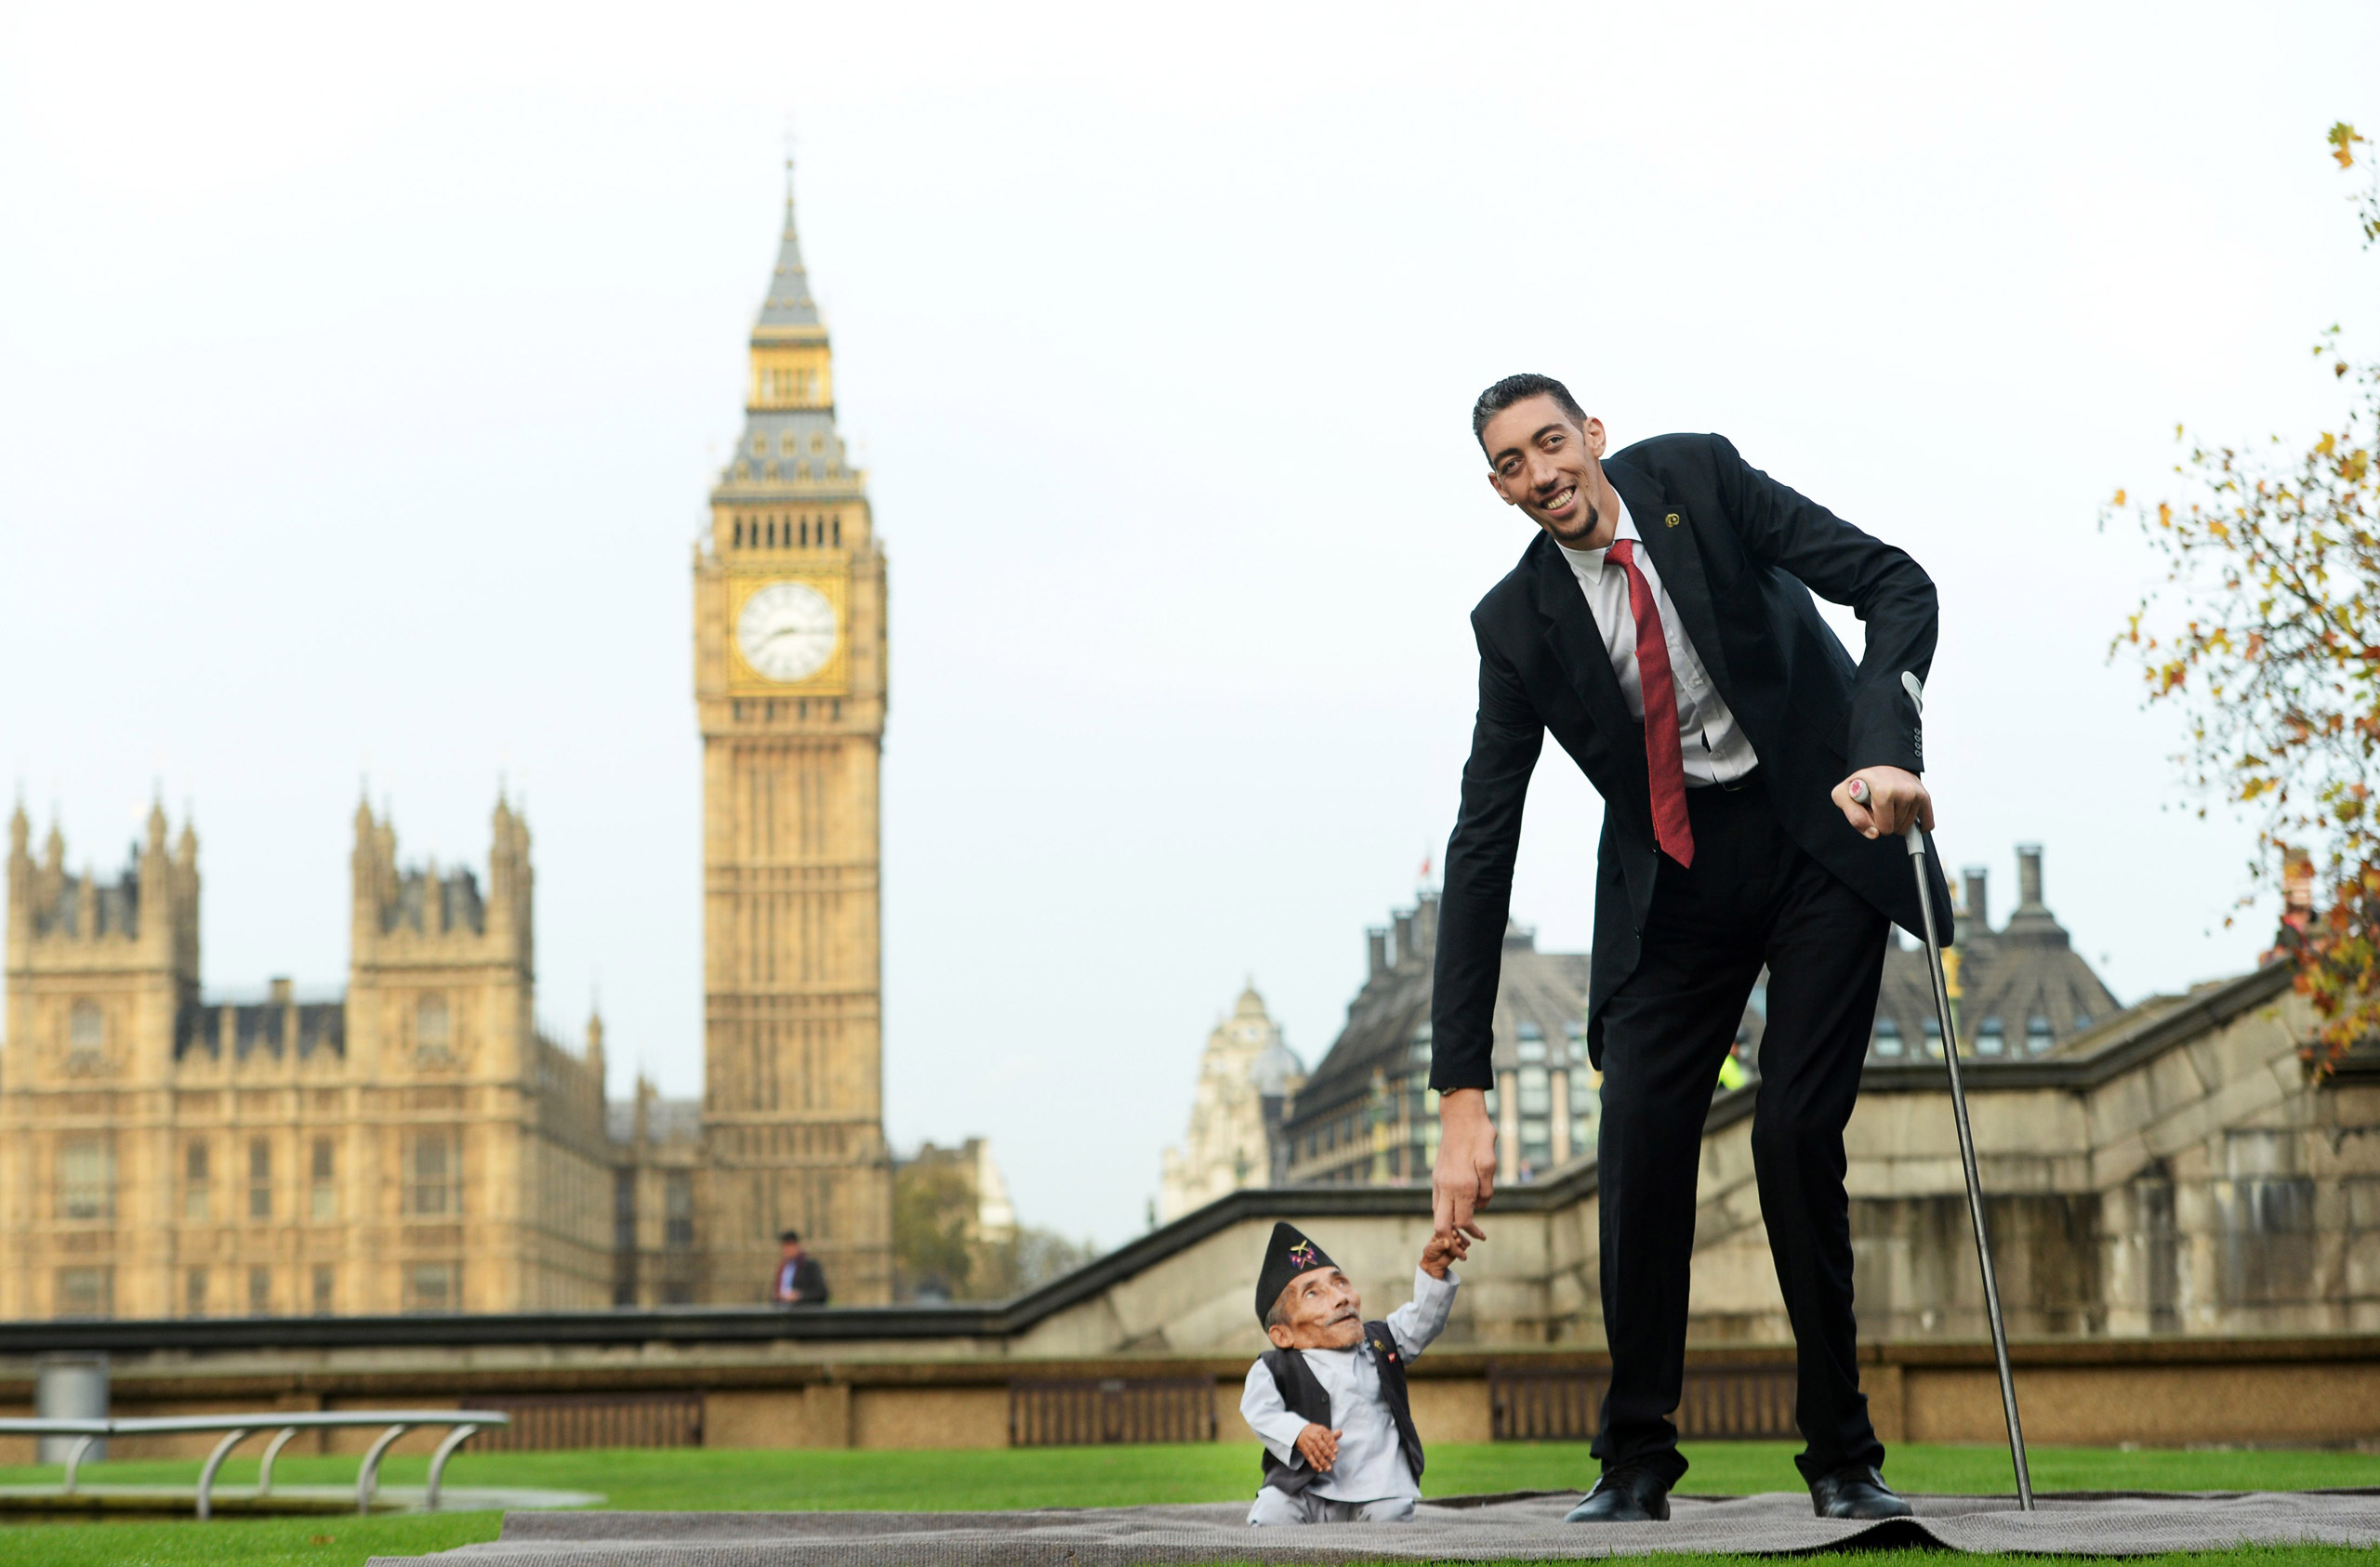 The Shortest Man Ever Measured Has Died | Time